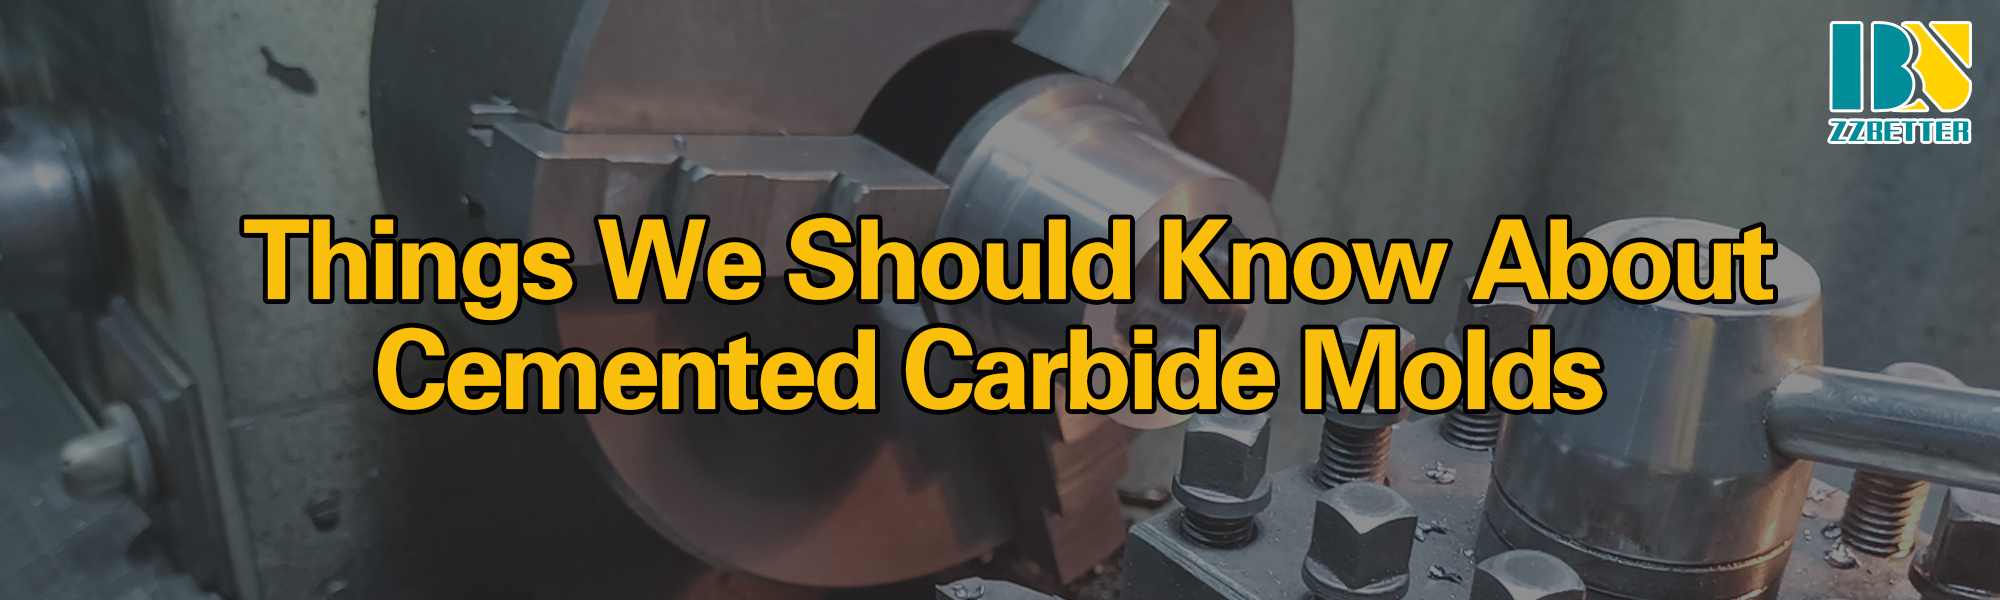 Things We Should Know About Cemented Carbide MoldsThings We Should Know About Cemented Carbide Molds